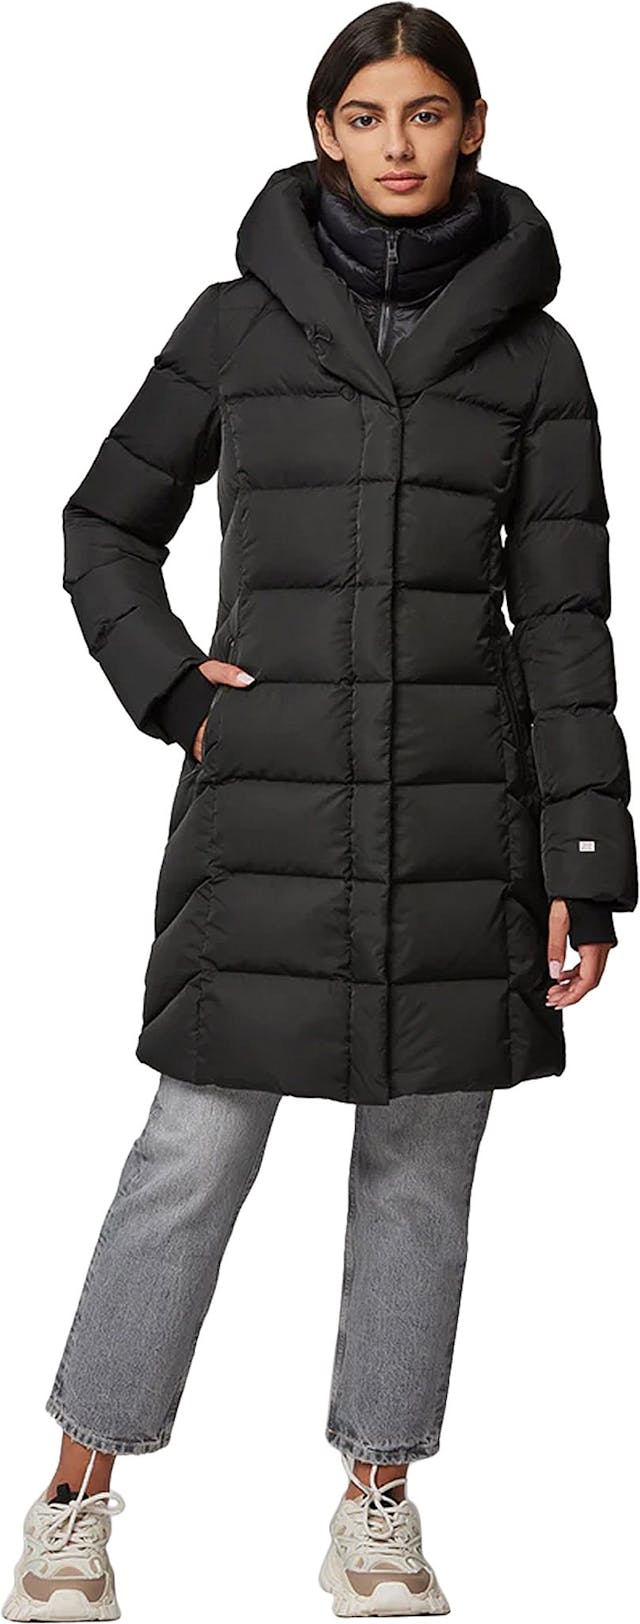 Product image for Sonny-TD Slim-Fit Radiant Down Coat with Hood - Women's